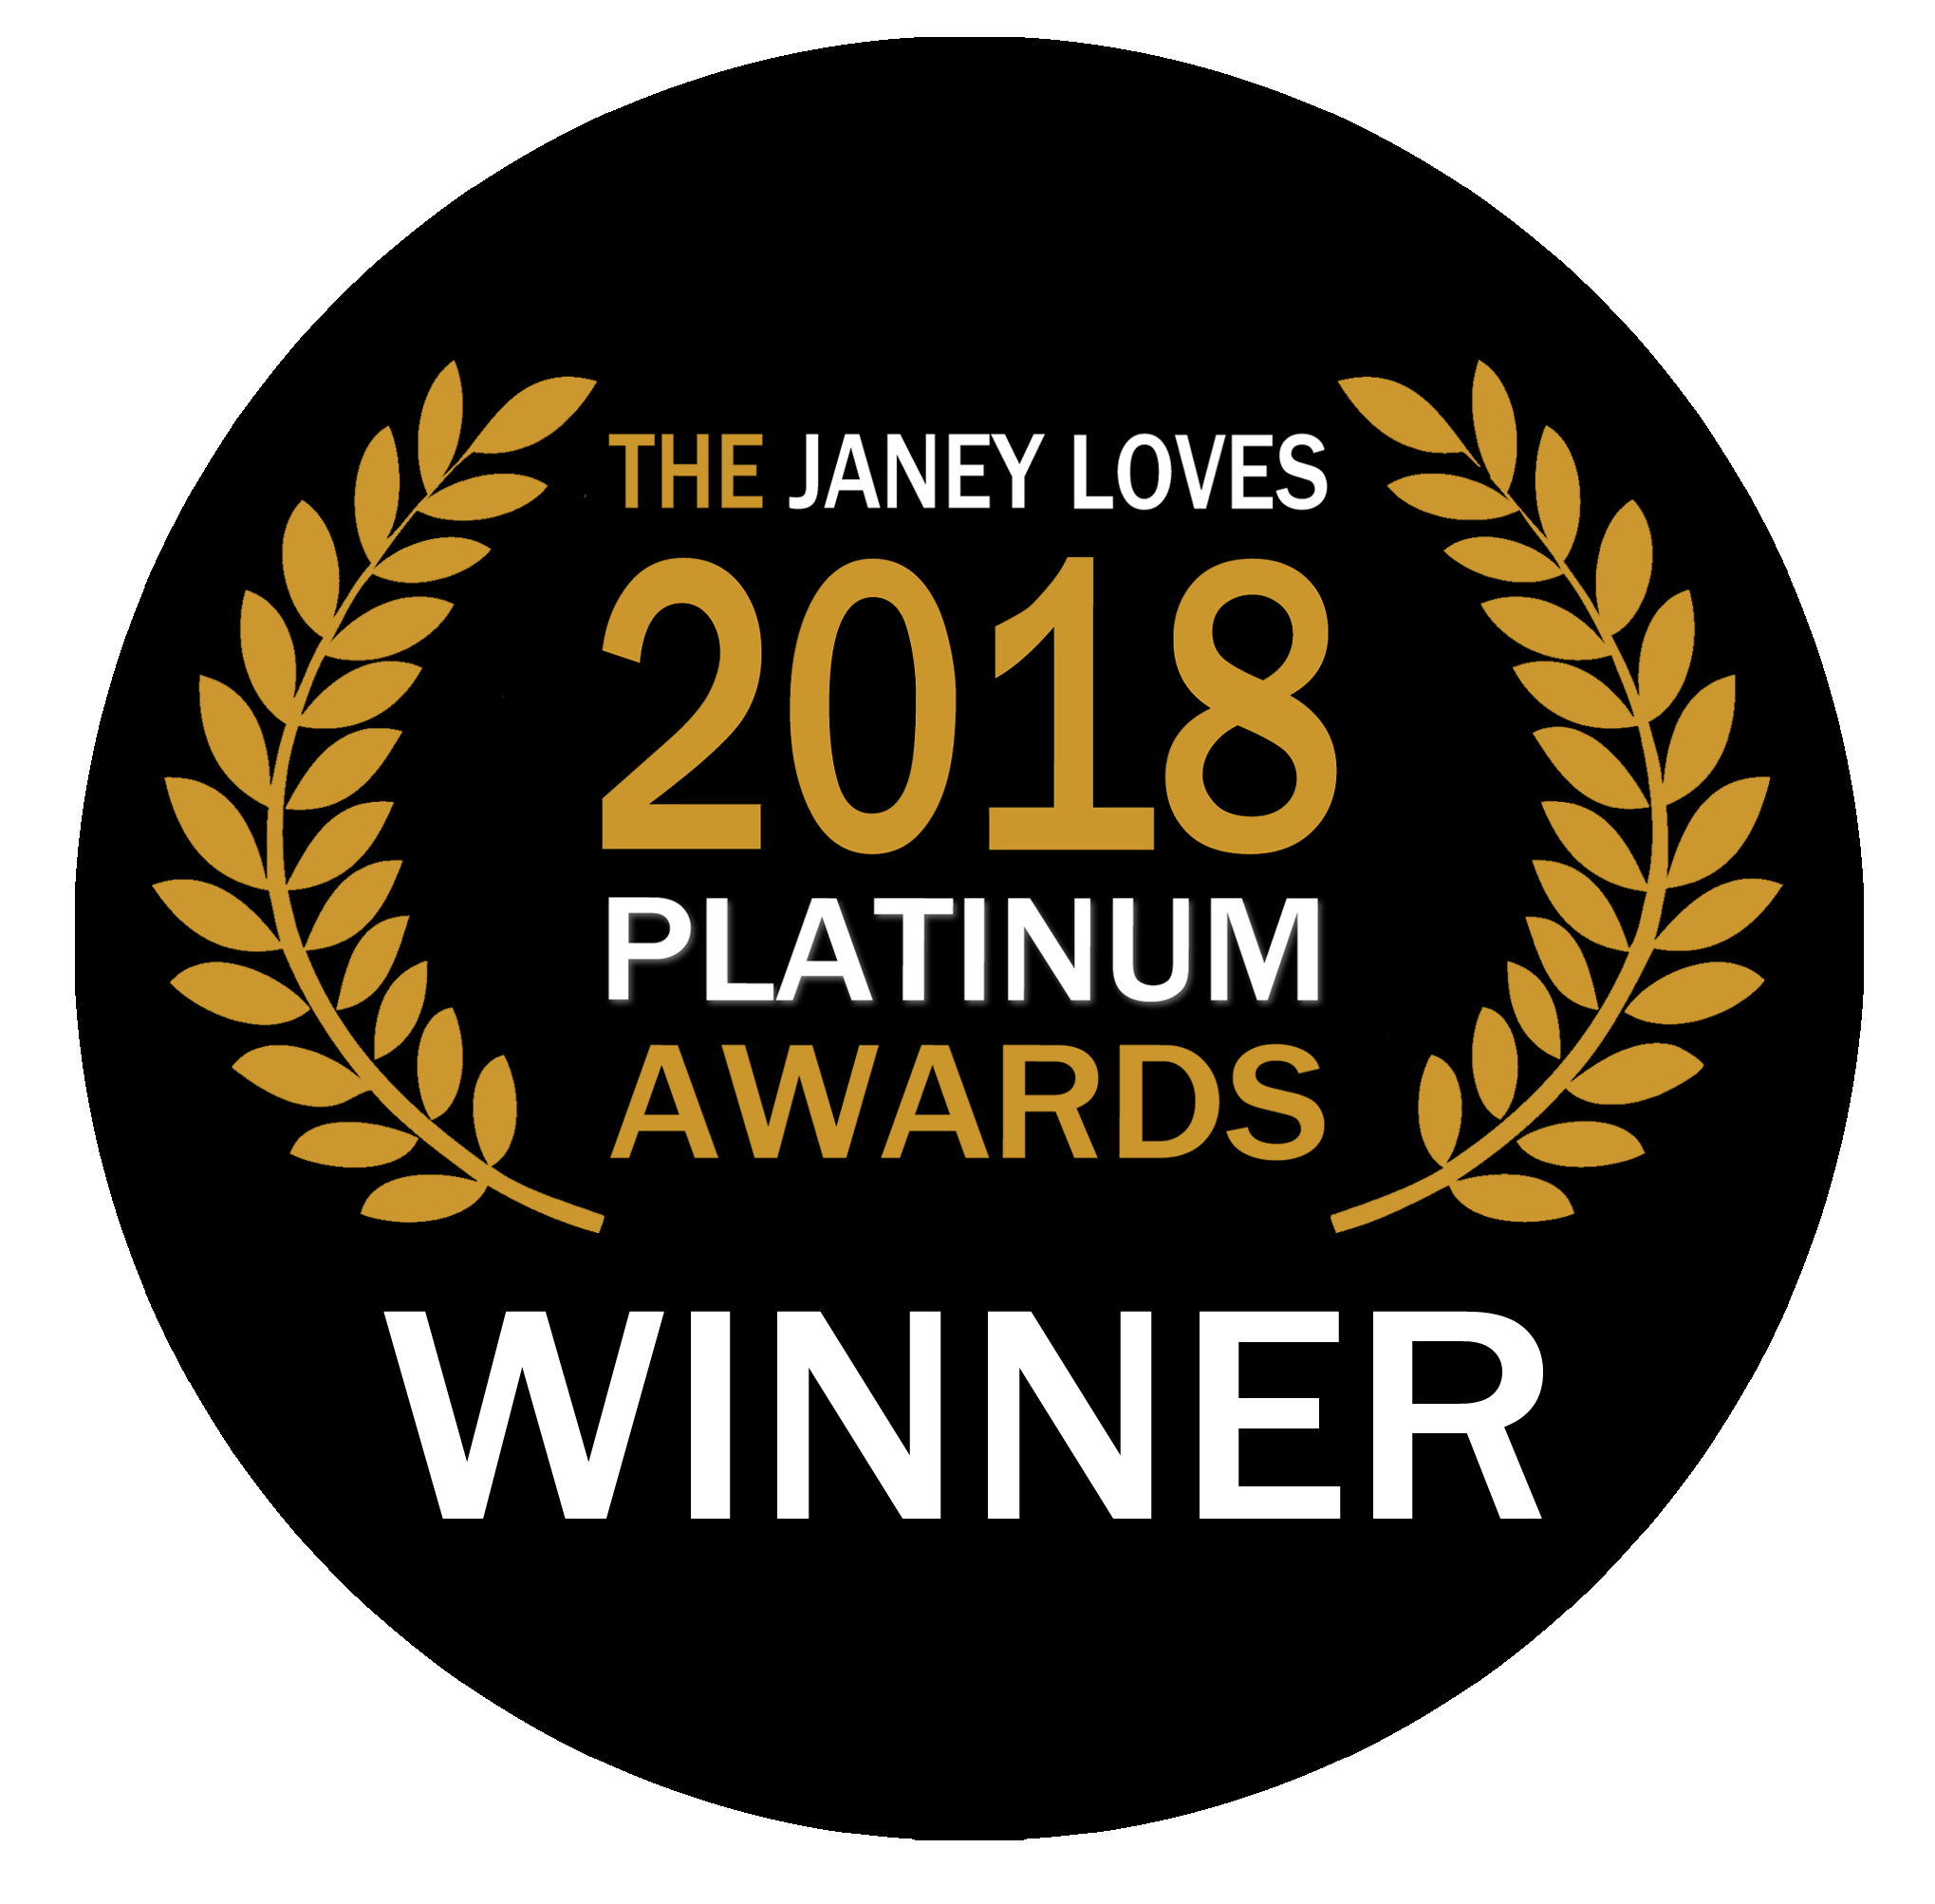 The Janey Loves 2018 Platinum Awards winner, Alteya, is known for their exceptional Bulgarian Rose products sourced from its own rose fields.